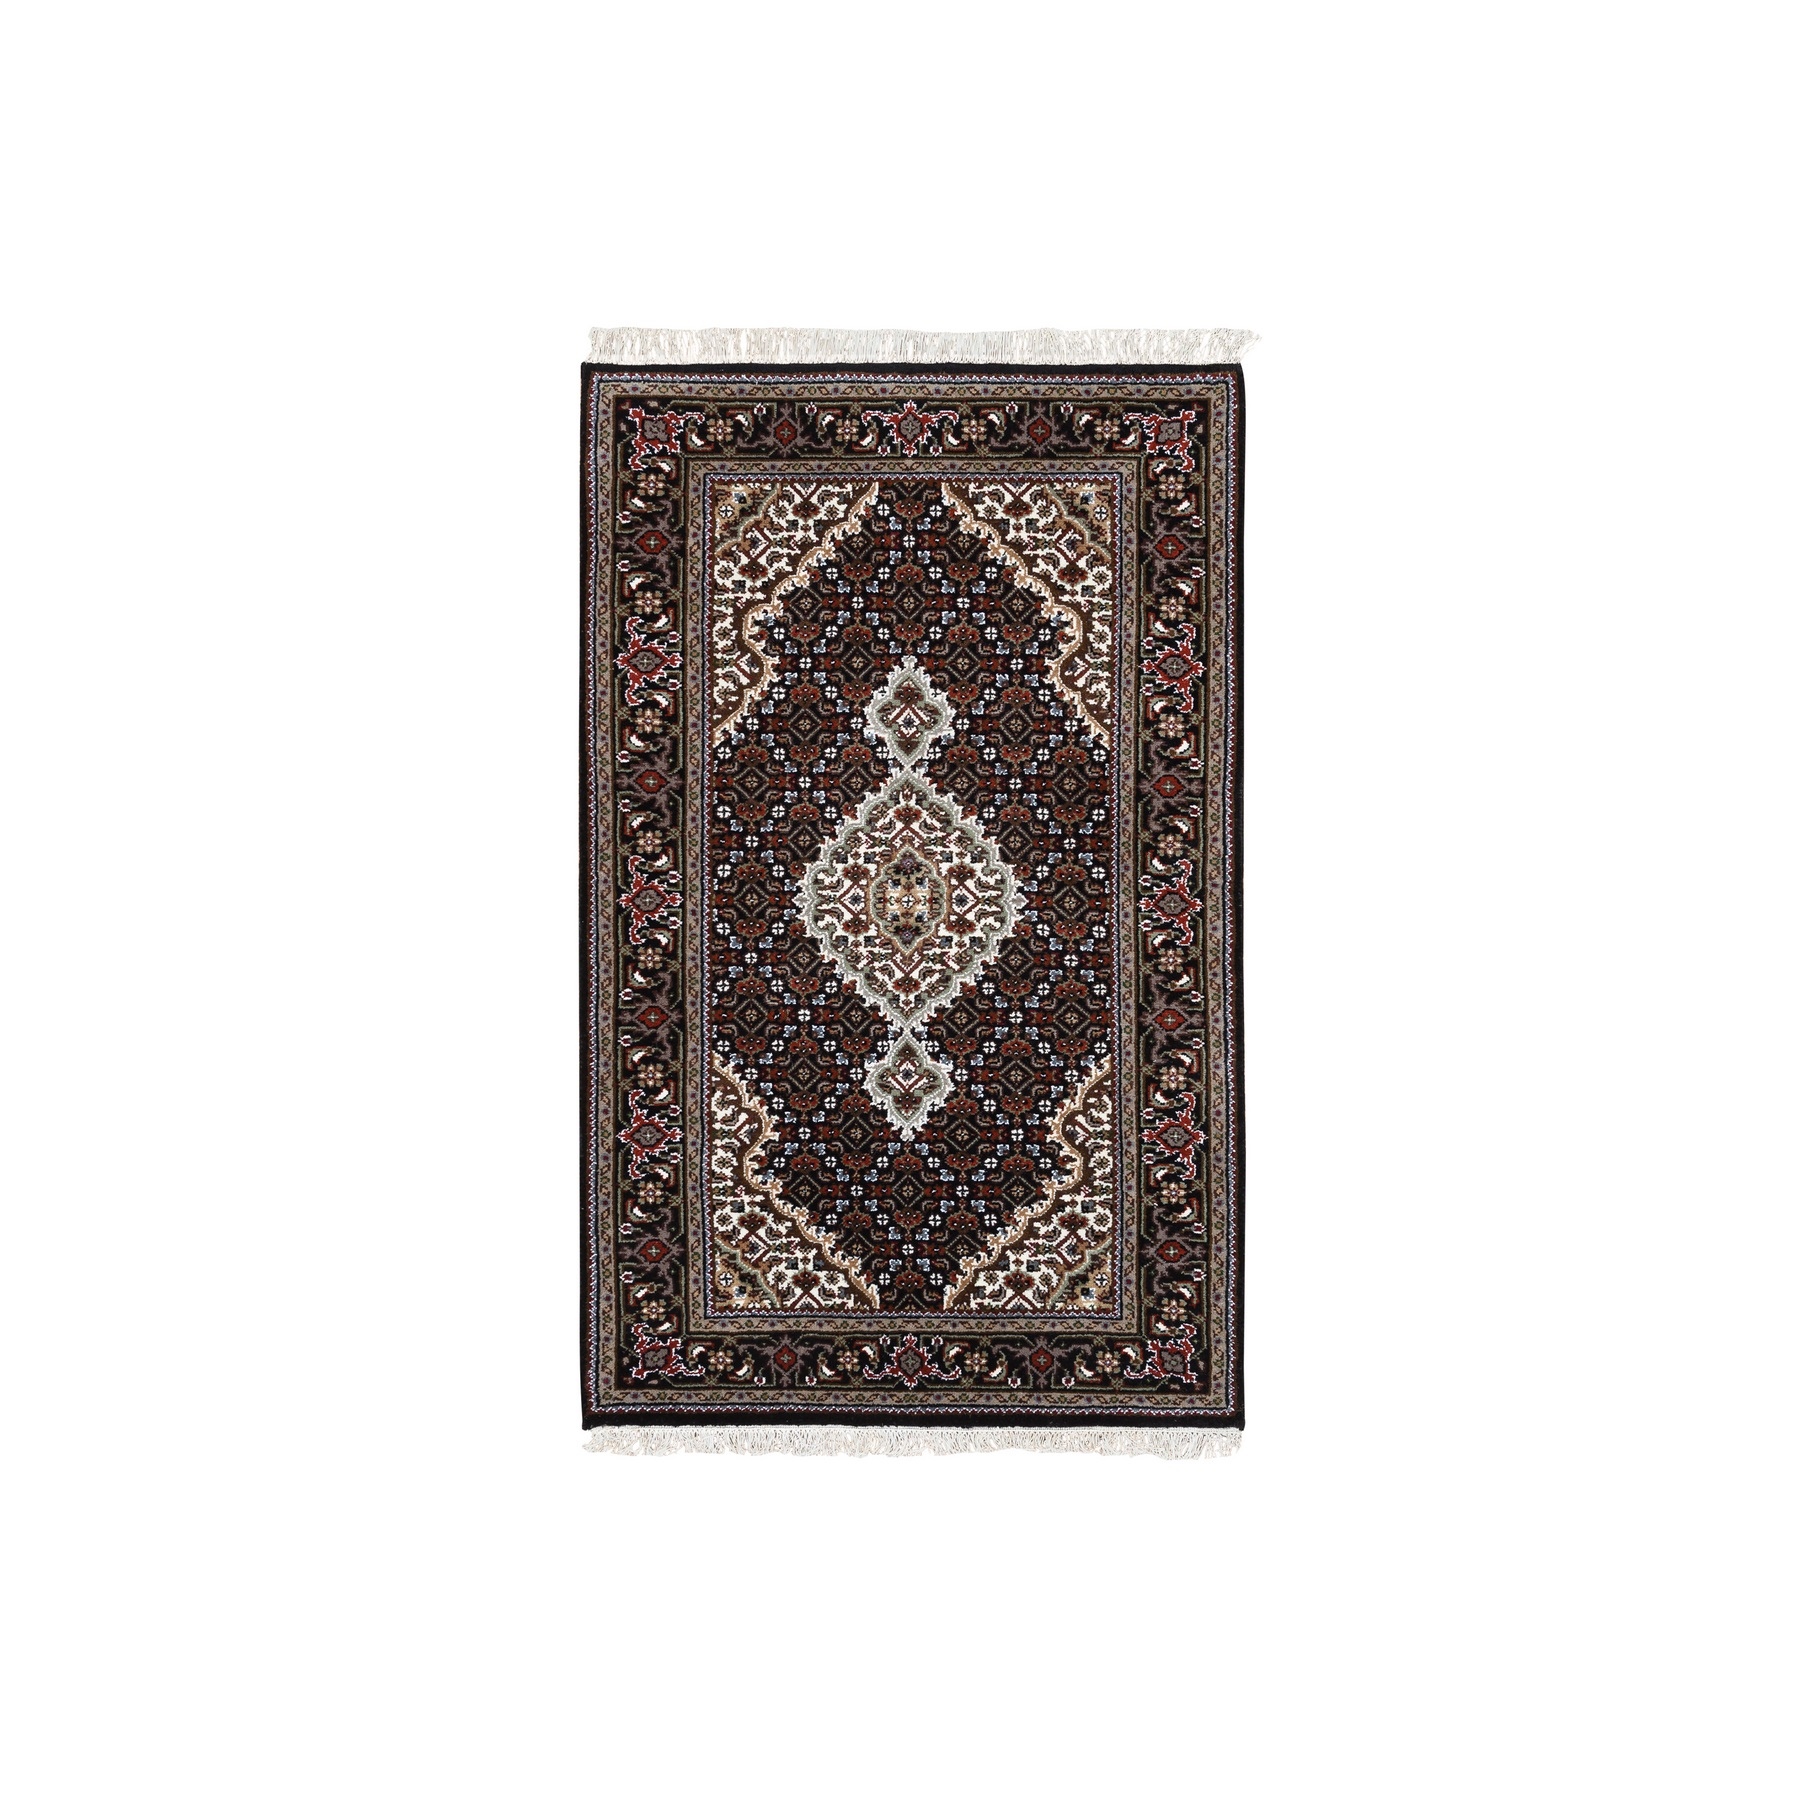 Pirniakan Collection Hand Knotted Black Rug No: 1124968